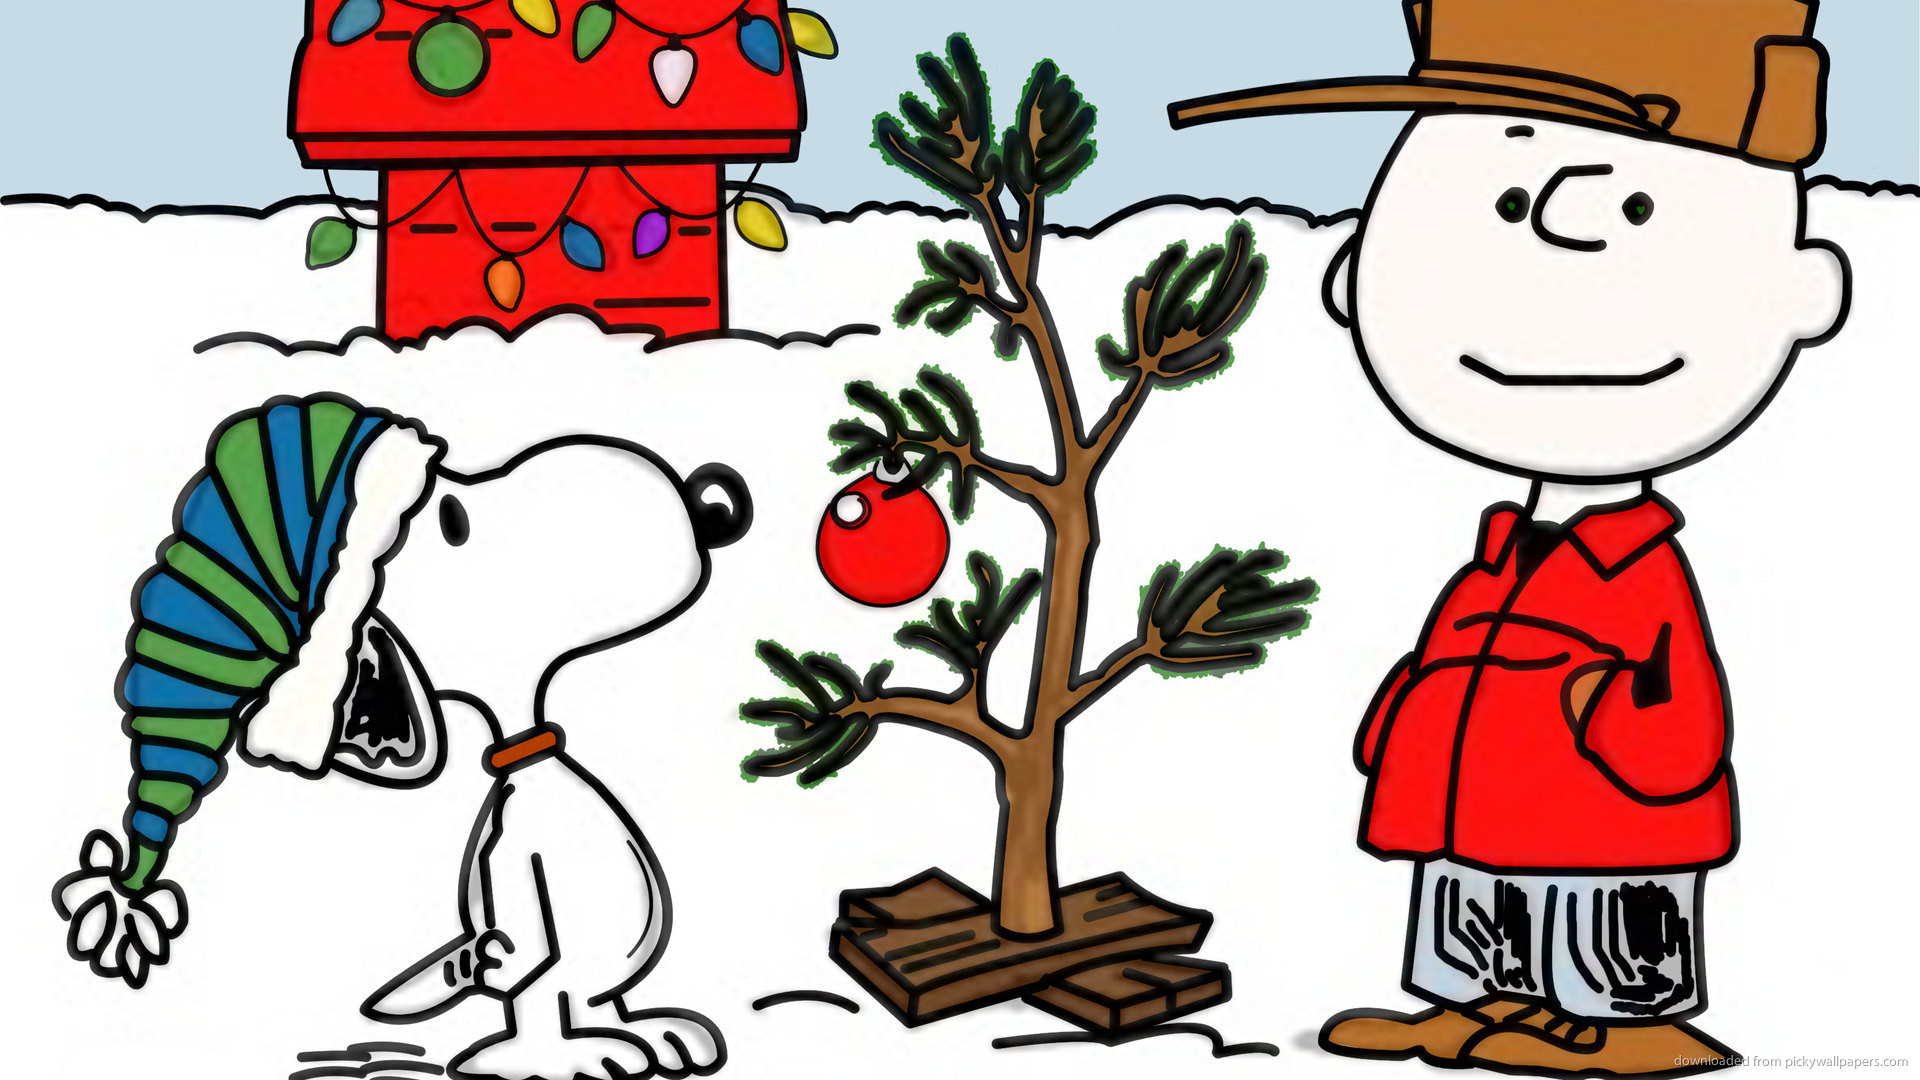 1920x1080  Snoopy Christmas Picture For Iphone, Blackberry, Ipad, Snoopy